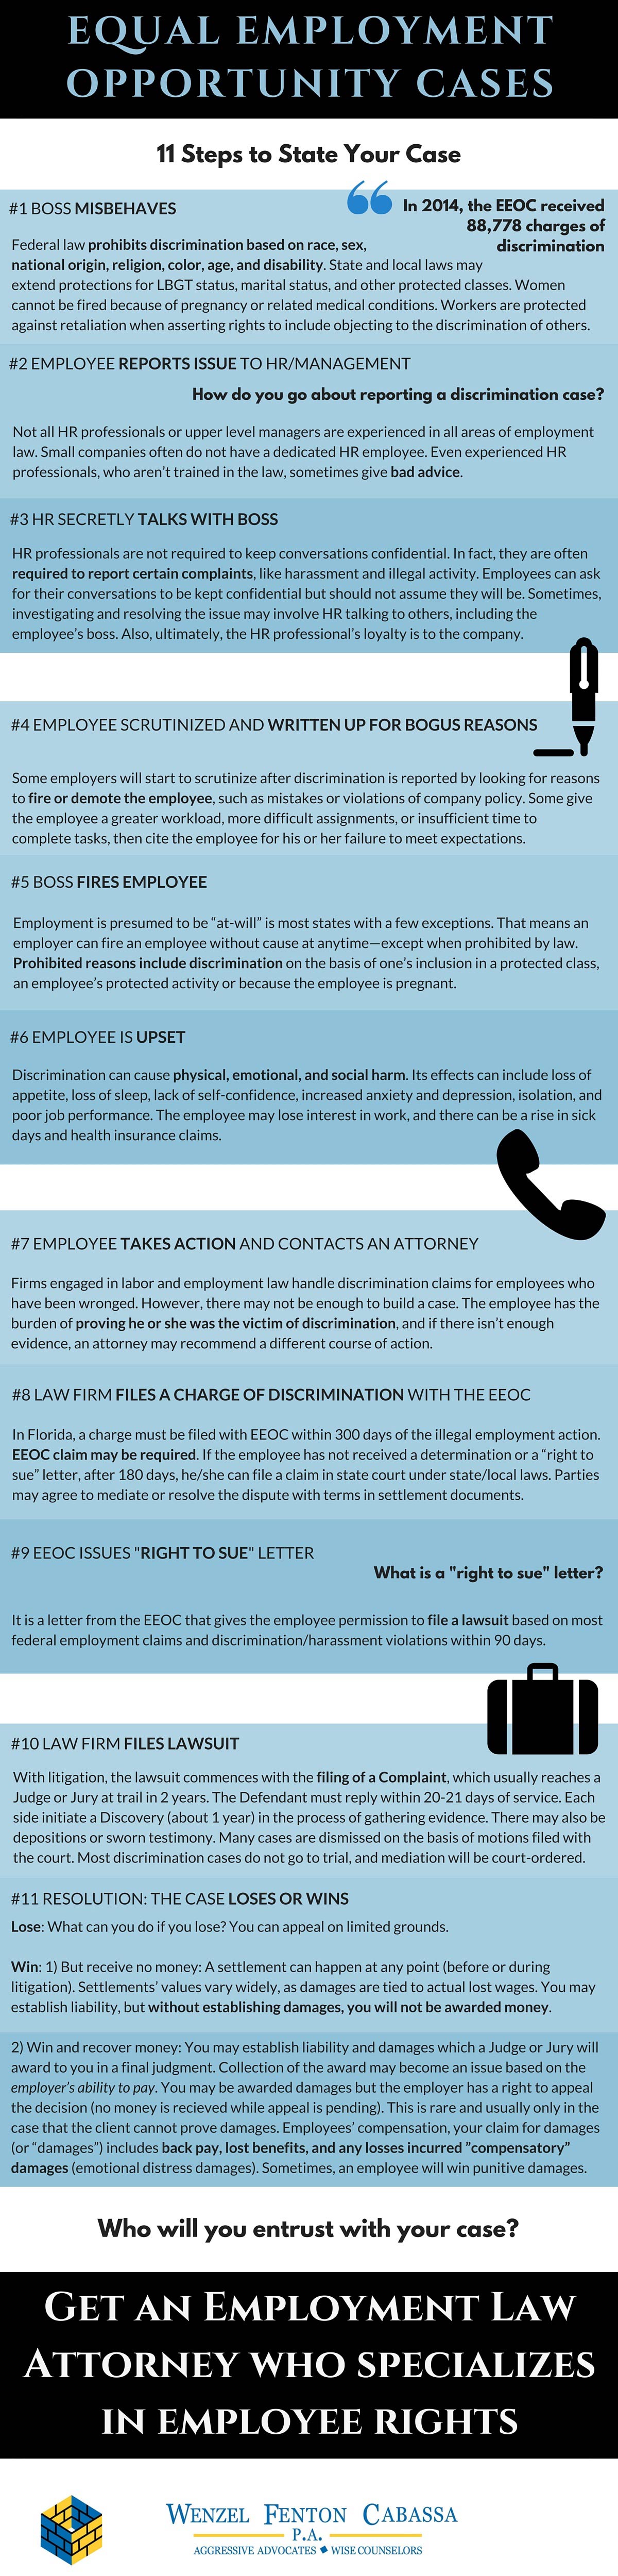 11-steps-to-state-your-eeoc-case-infographic